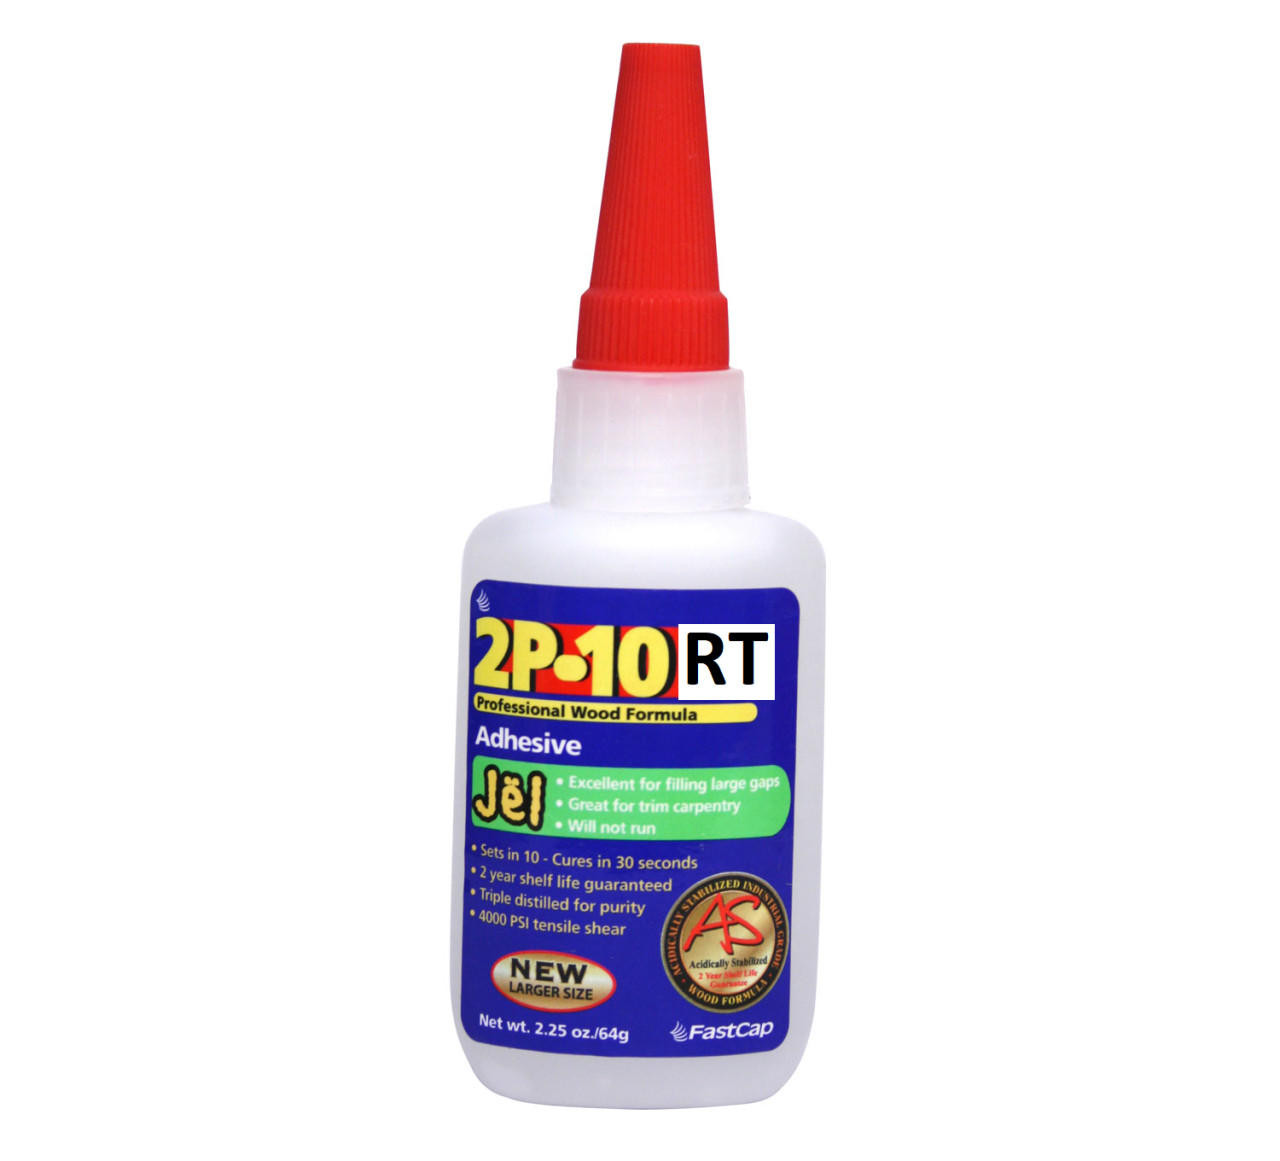  FastCap 2P-10 RT JEL 2.25 ADHESIVE Squeeze Bottle 